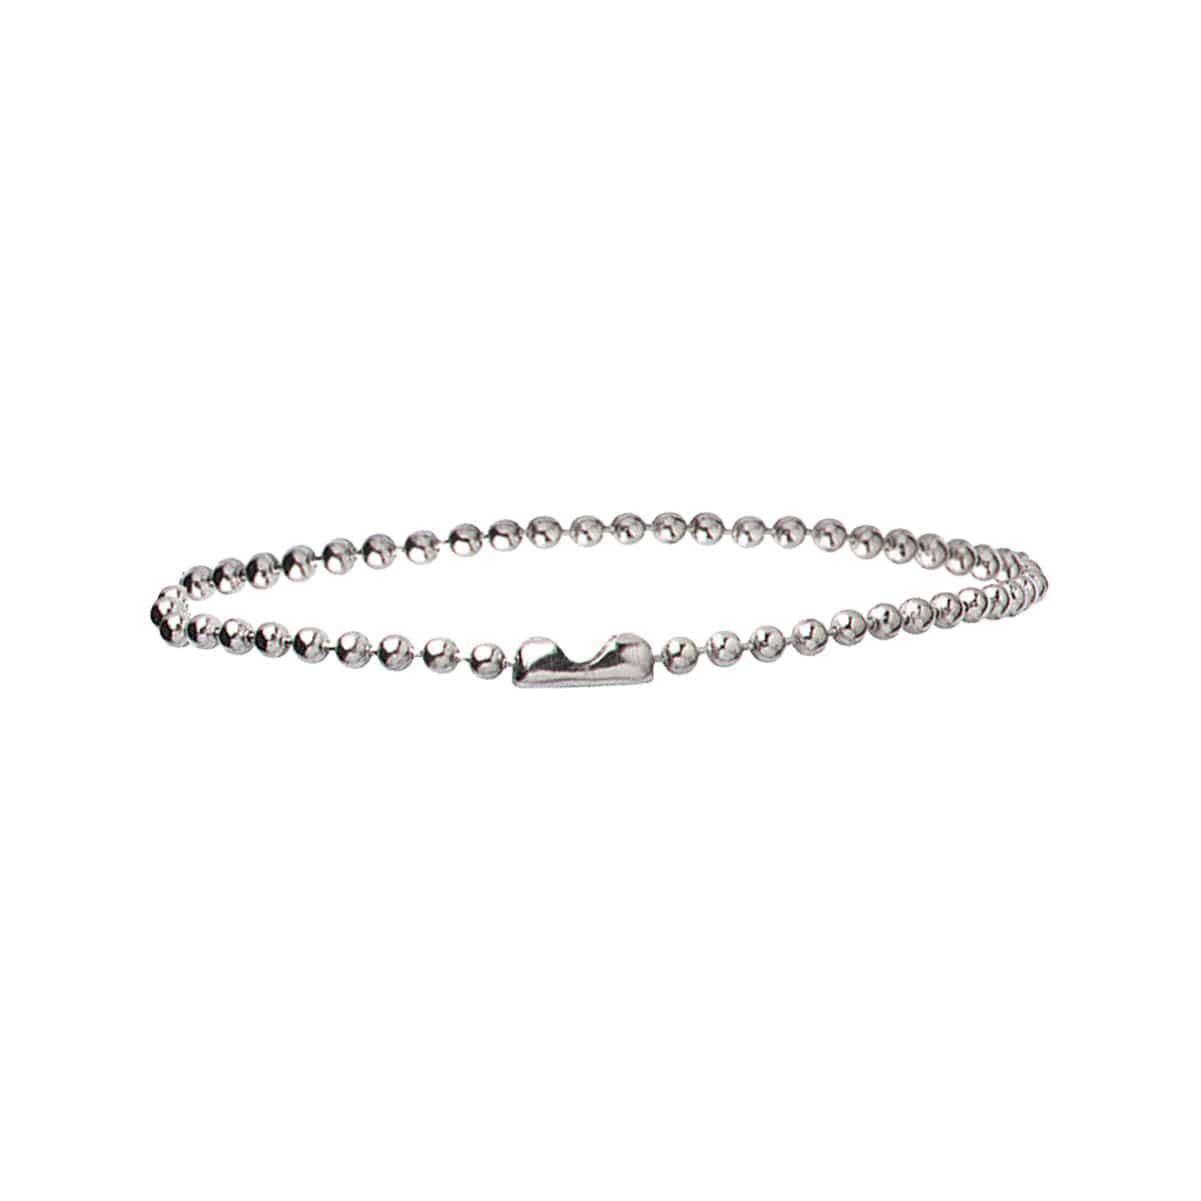 #3 Stainless Steel Ball Chains with Connector - 30 Inch Length